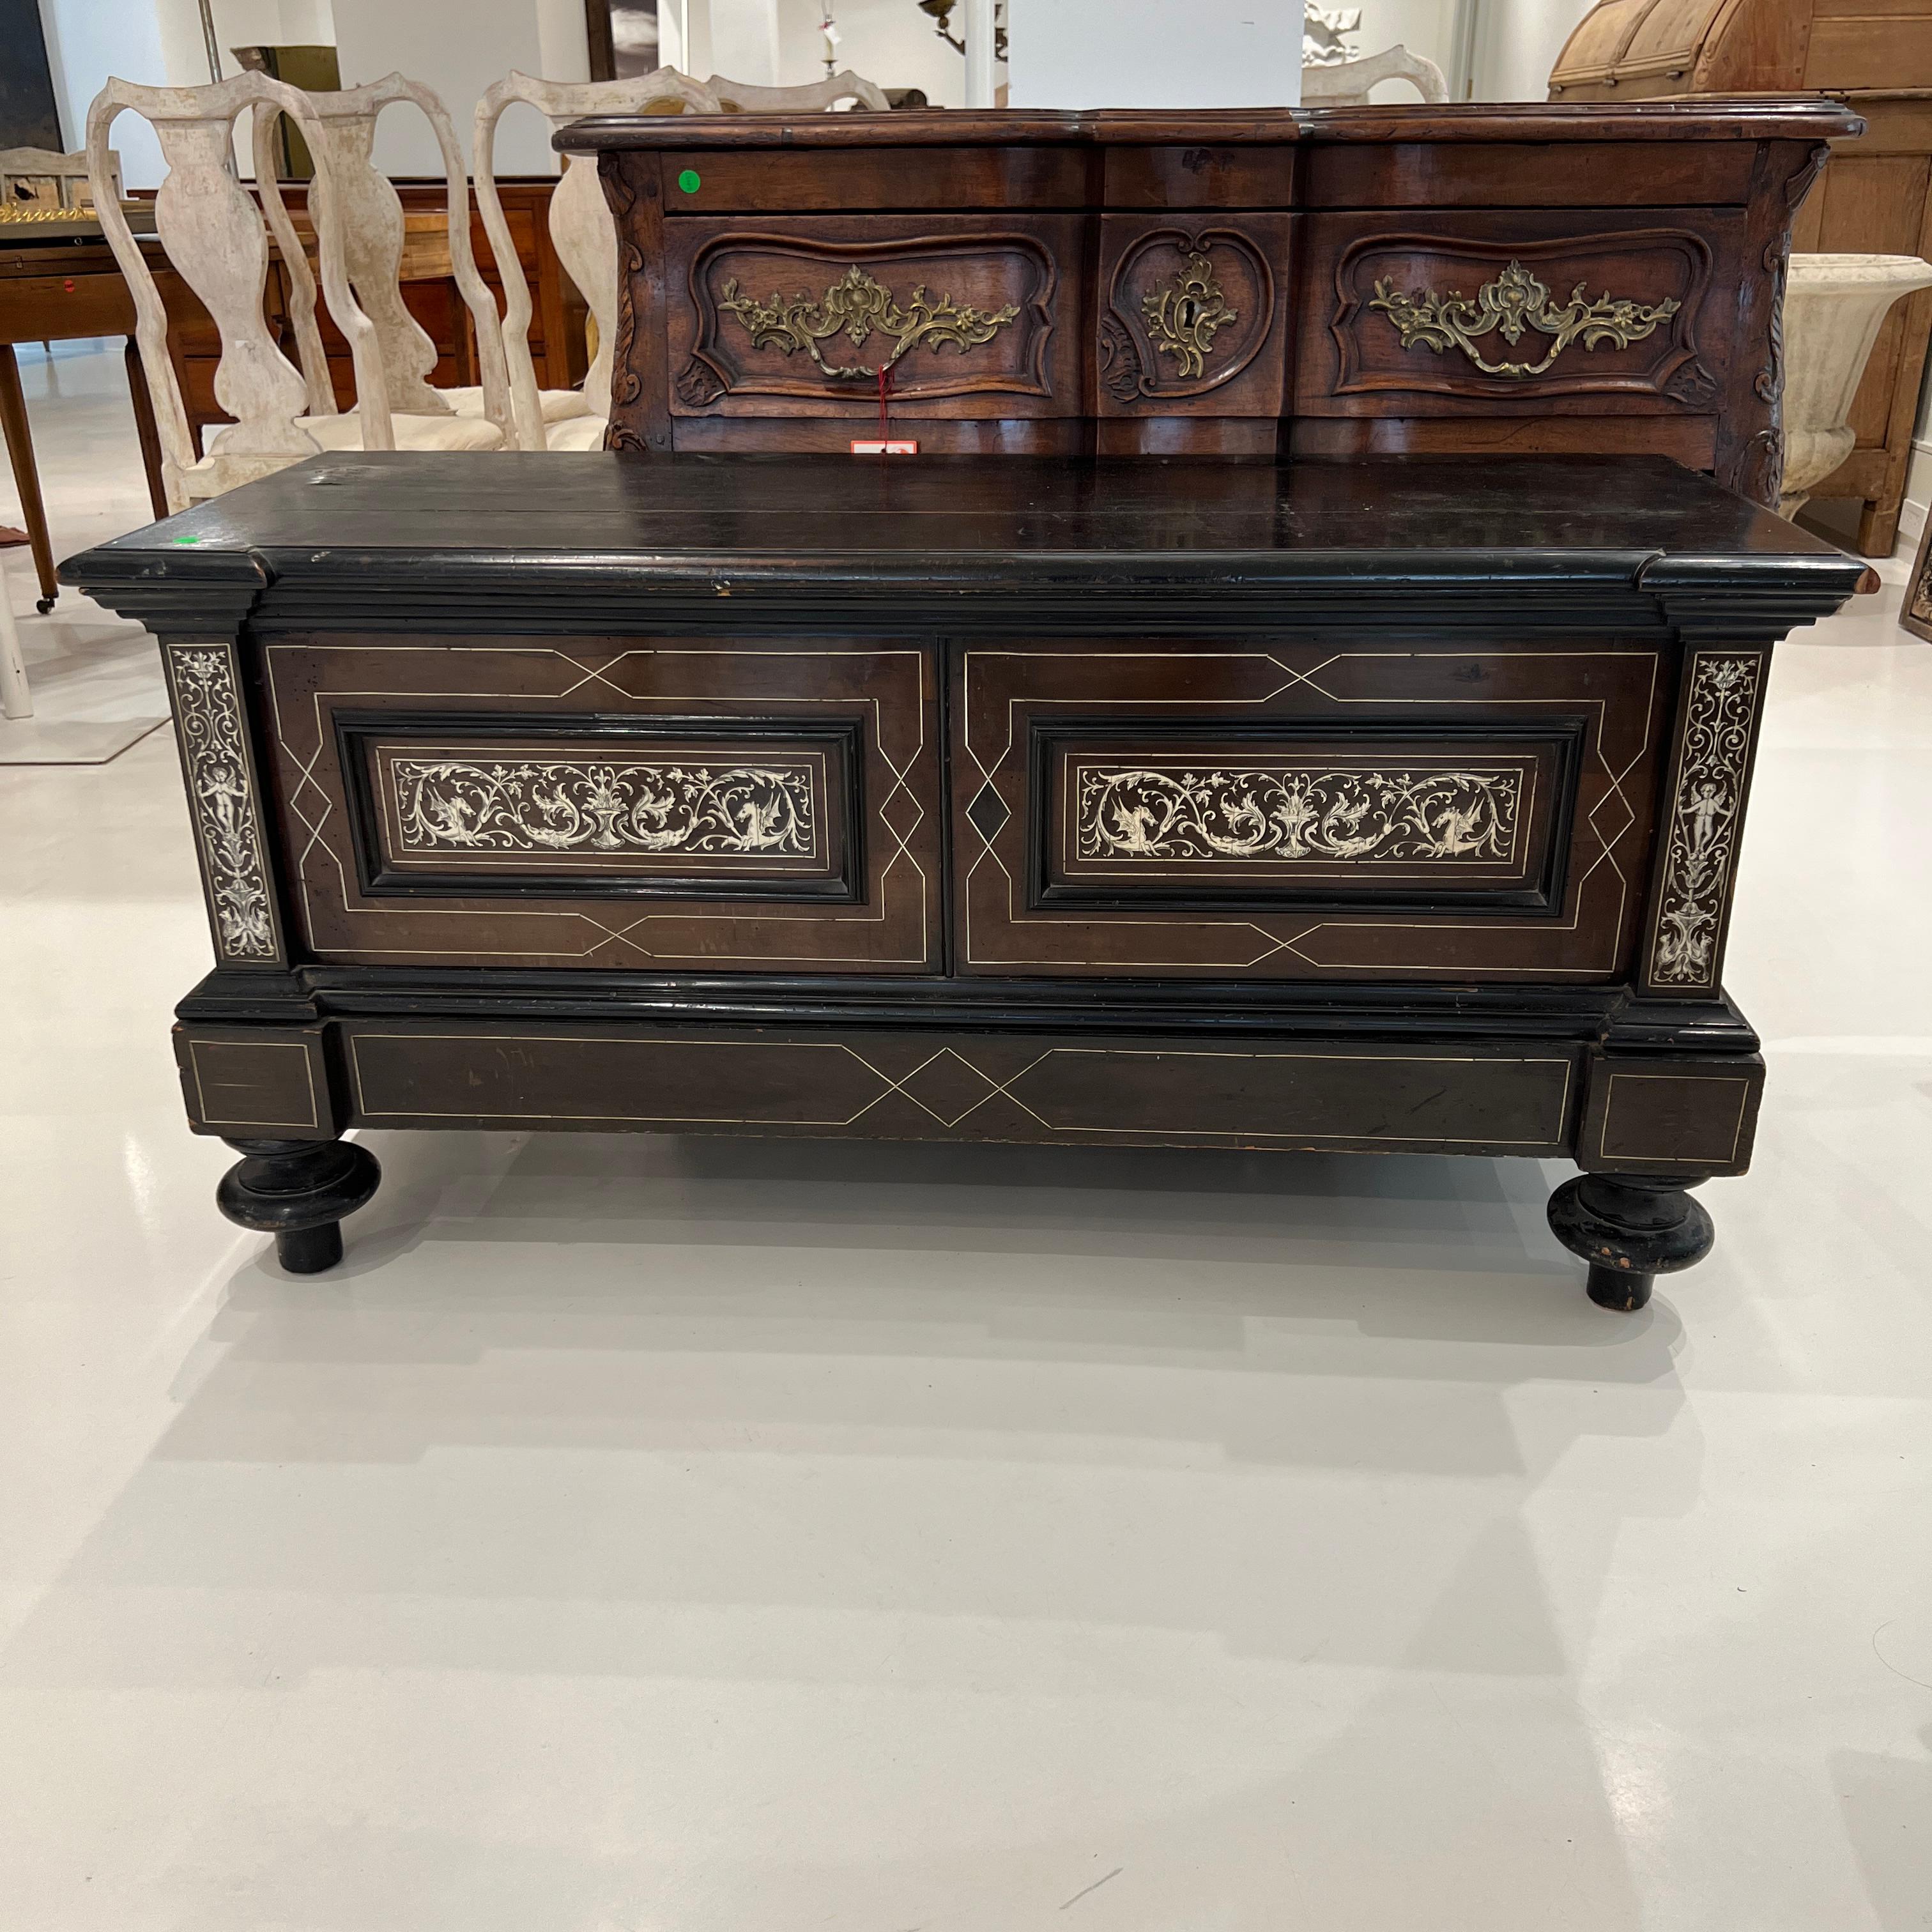 Black trunk with copious detailing and ornamentation in inlay bone.  Graceful turned feet at the front.  Fits perfectly at the foot of a bed.